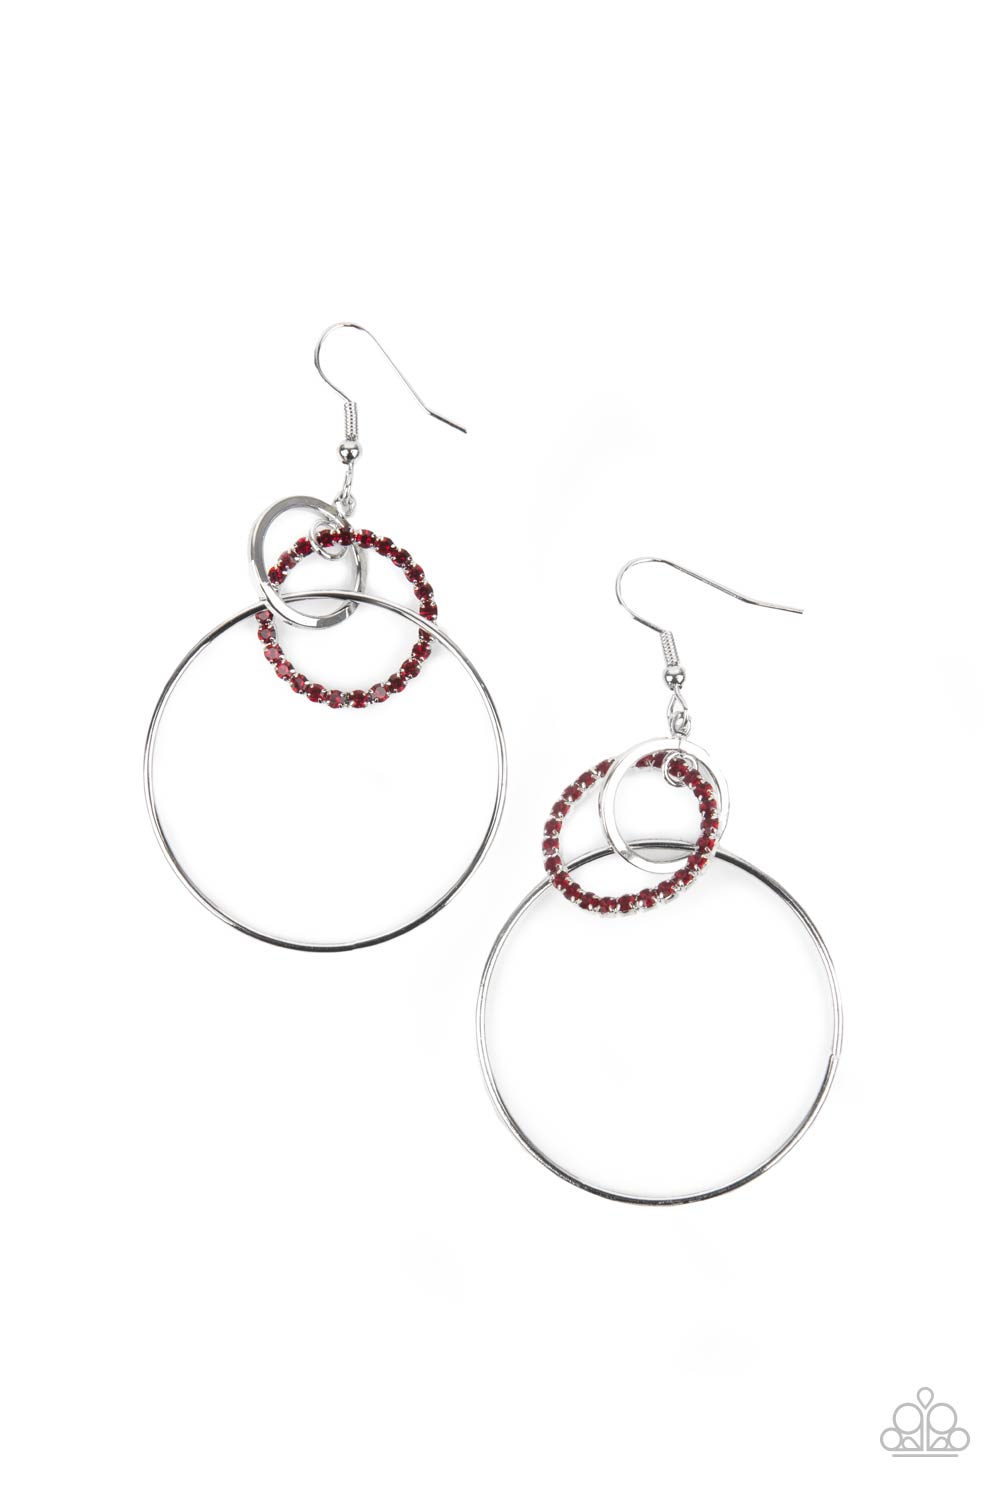 In An Orderly Fashion - Red Earrings - Princess Glam Shop